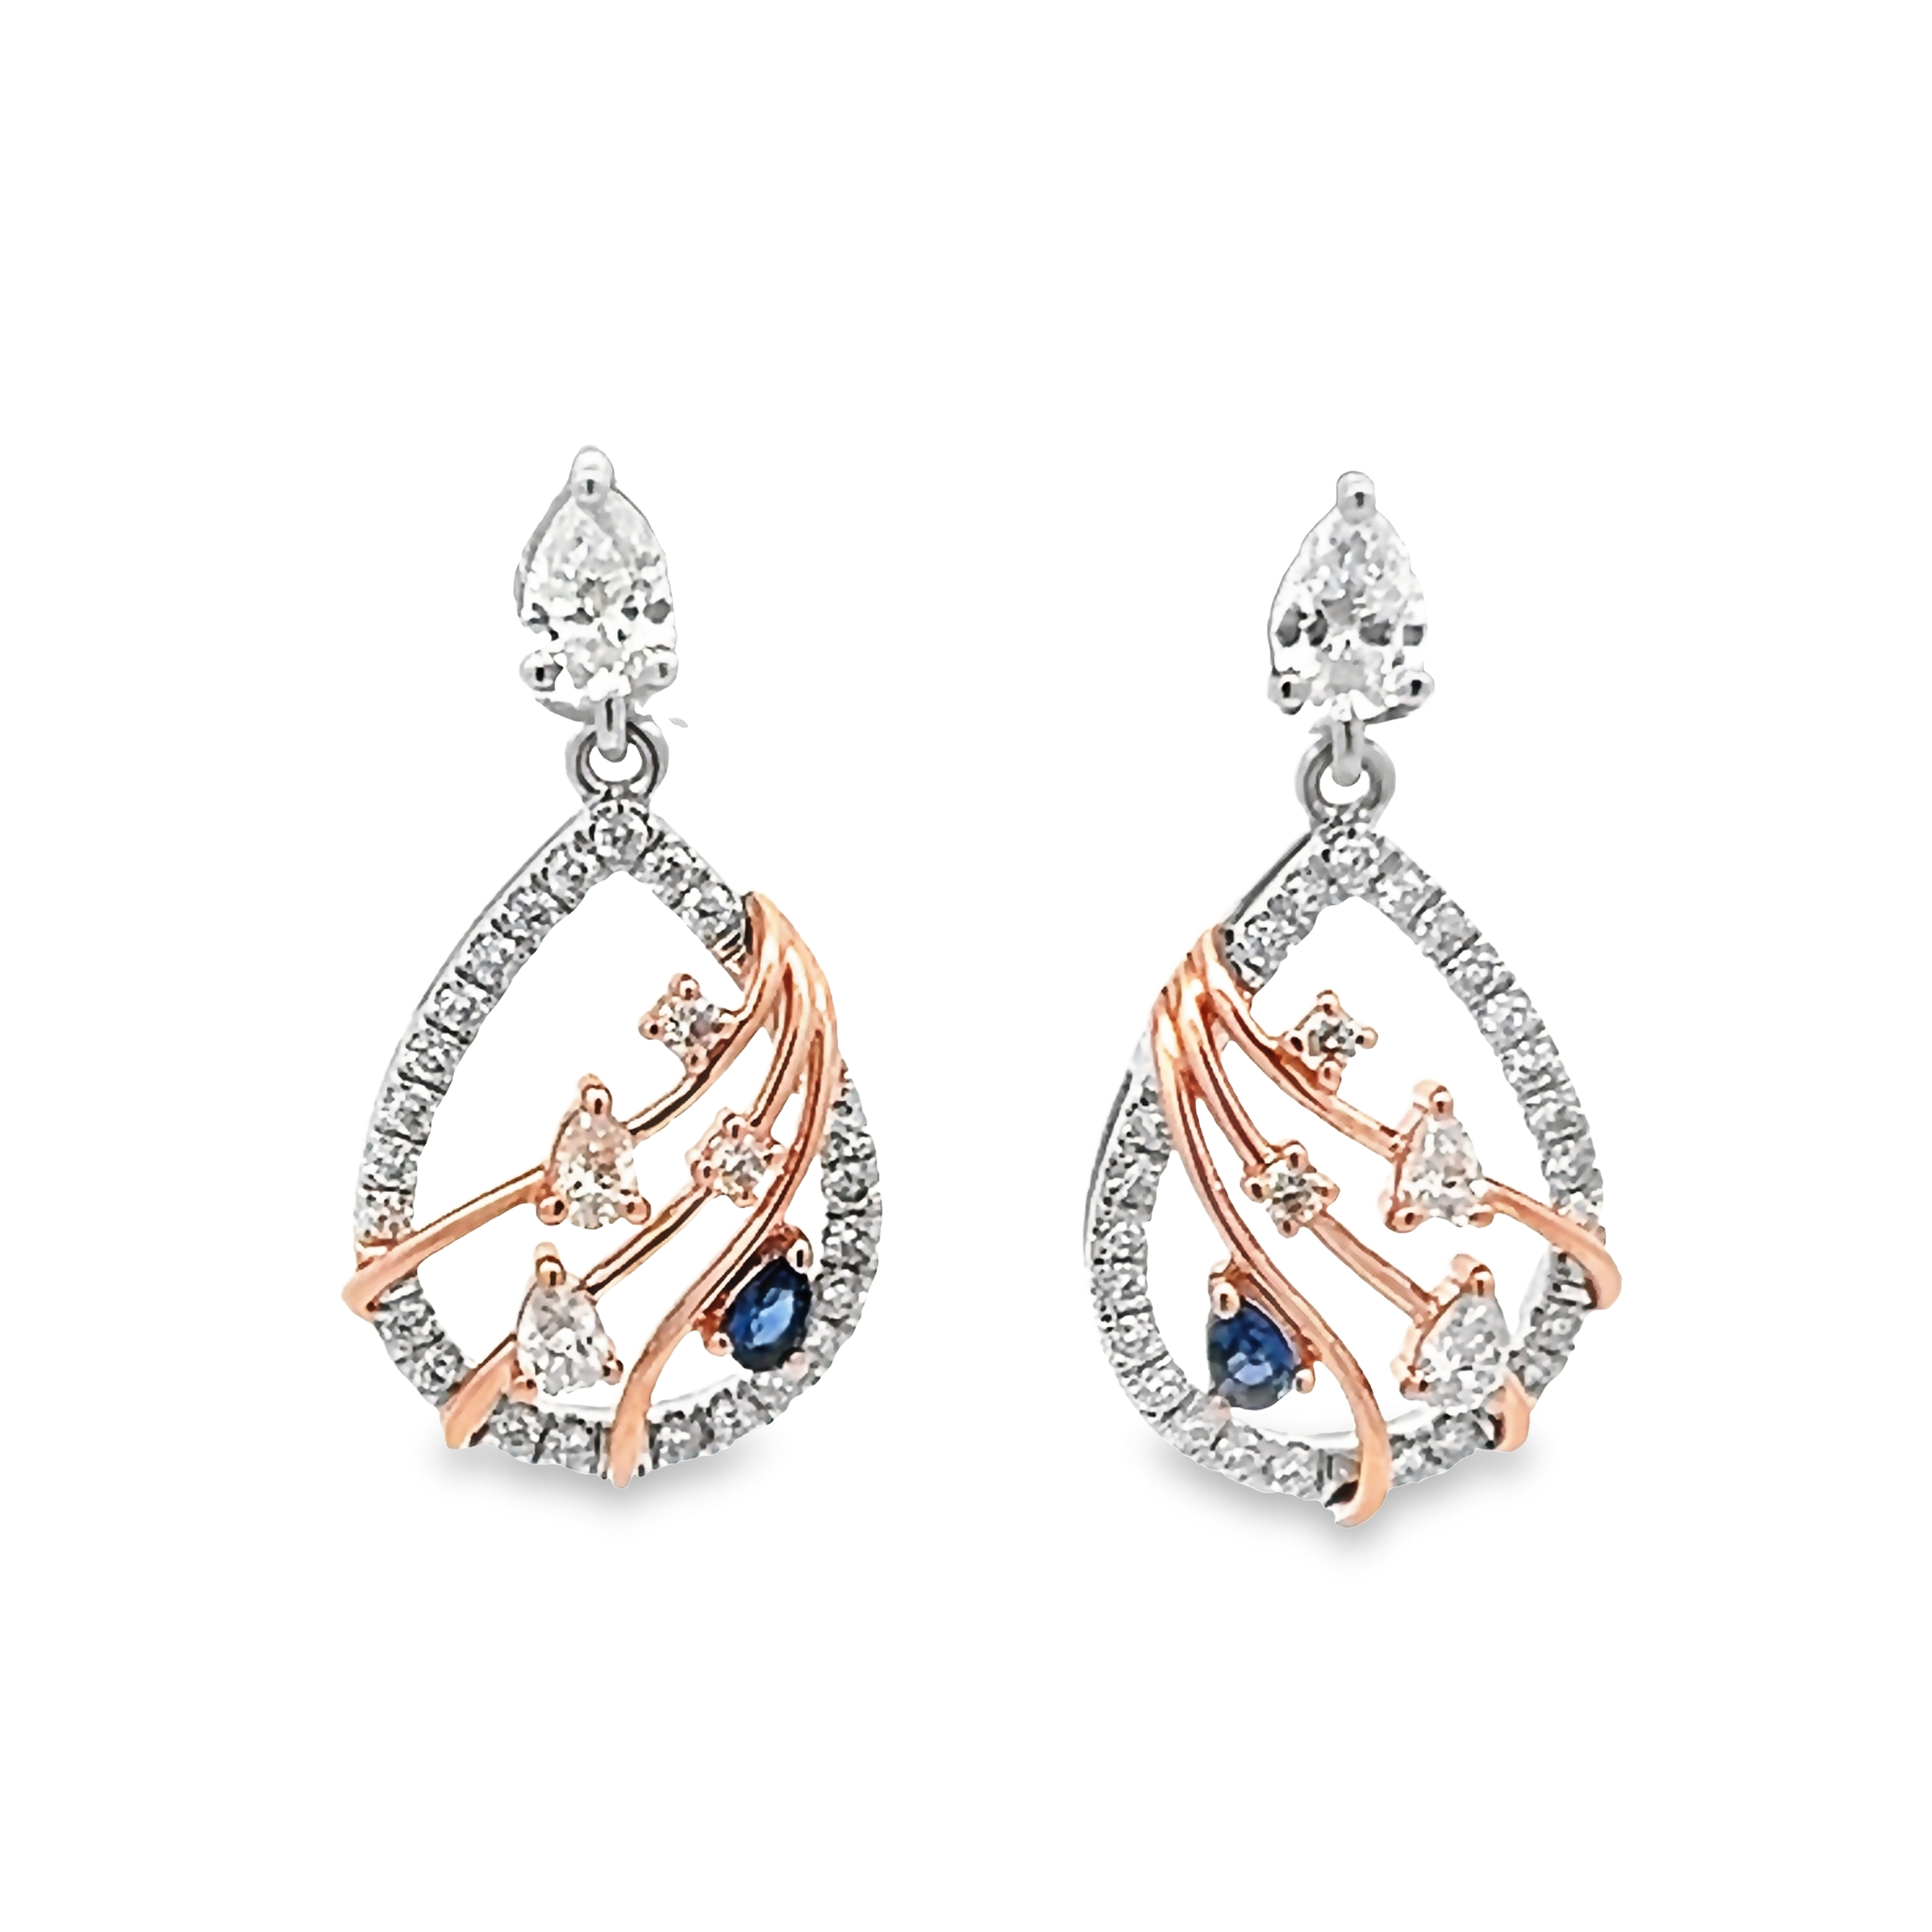 14k Two Toned Free Form Diamond And Sapphire Earrings